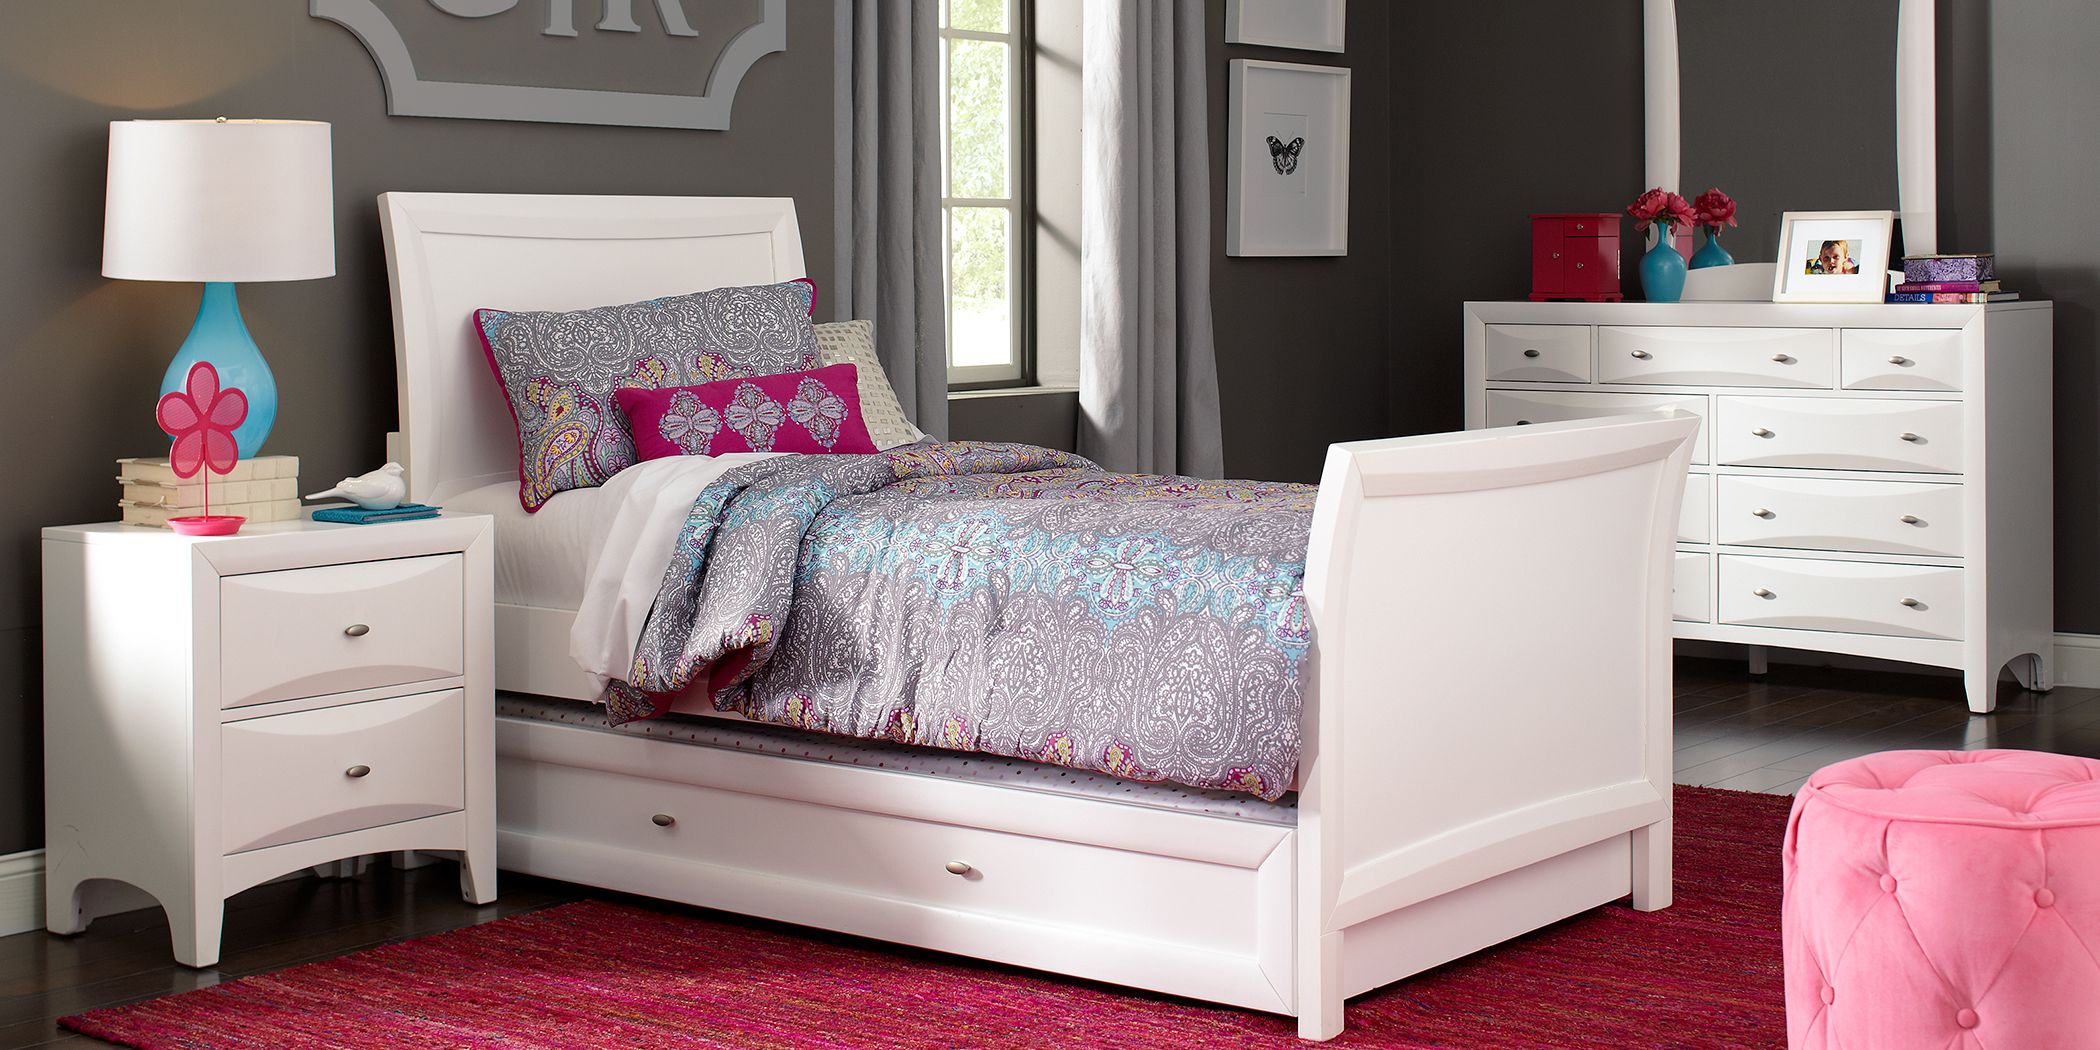 twin bed sets for kids